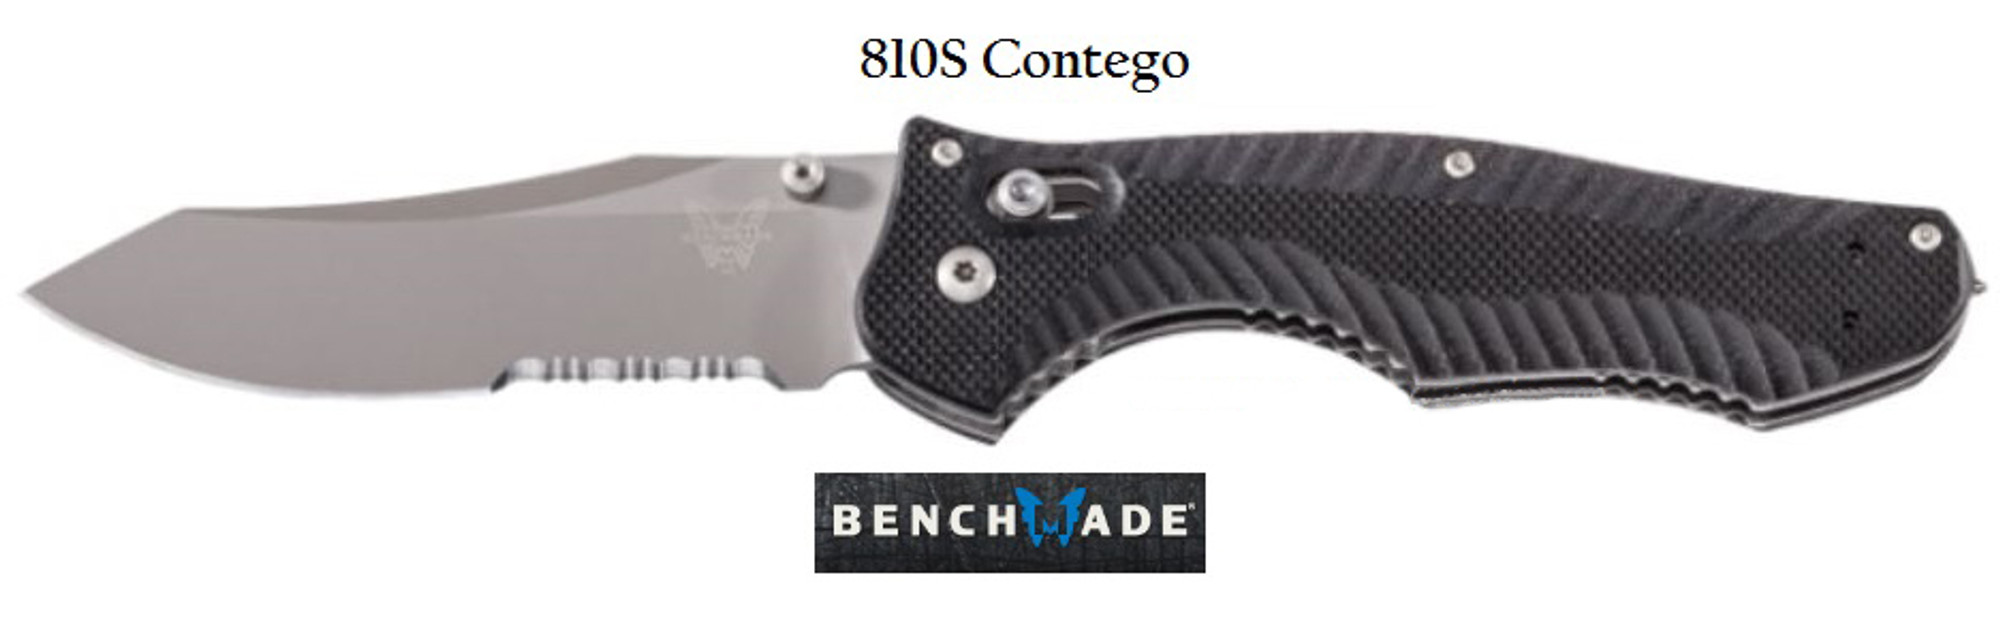 Benchmade 810S Contego Partially Serrated w/Glass Breaker